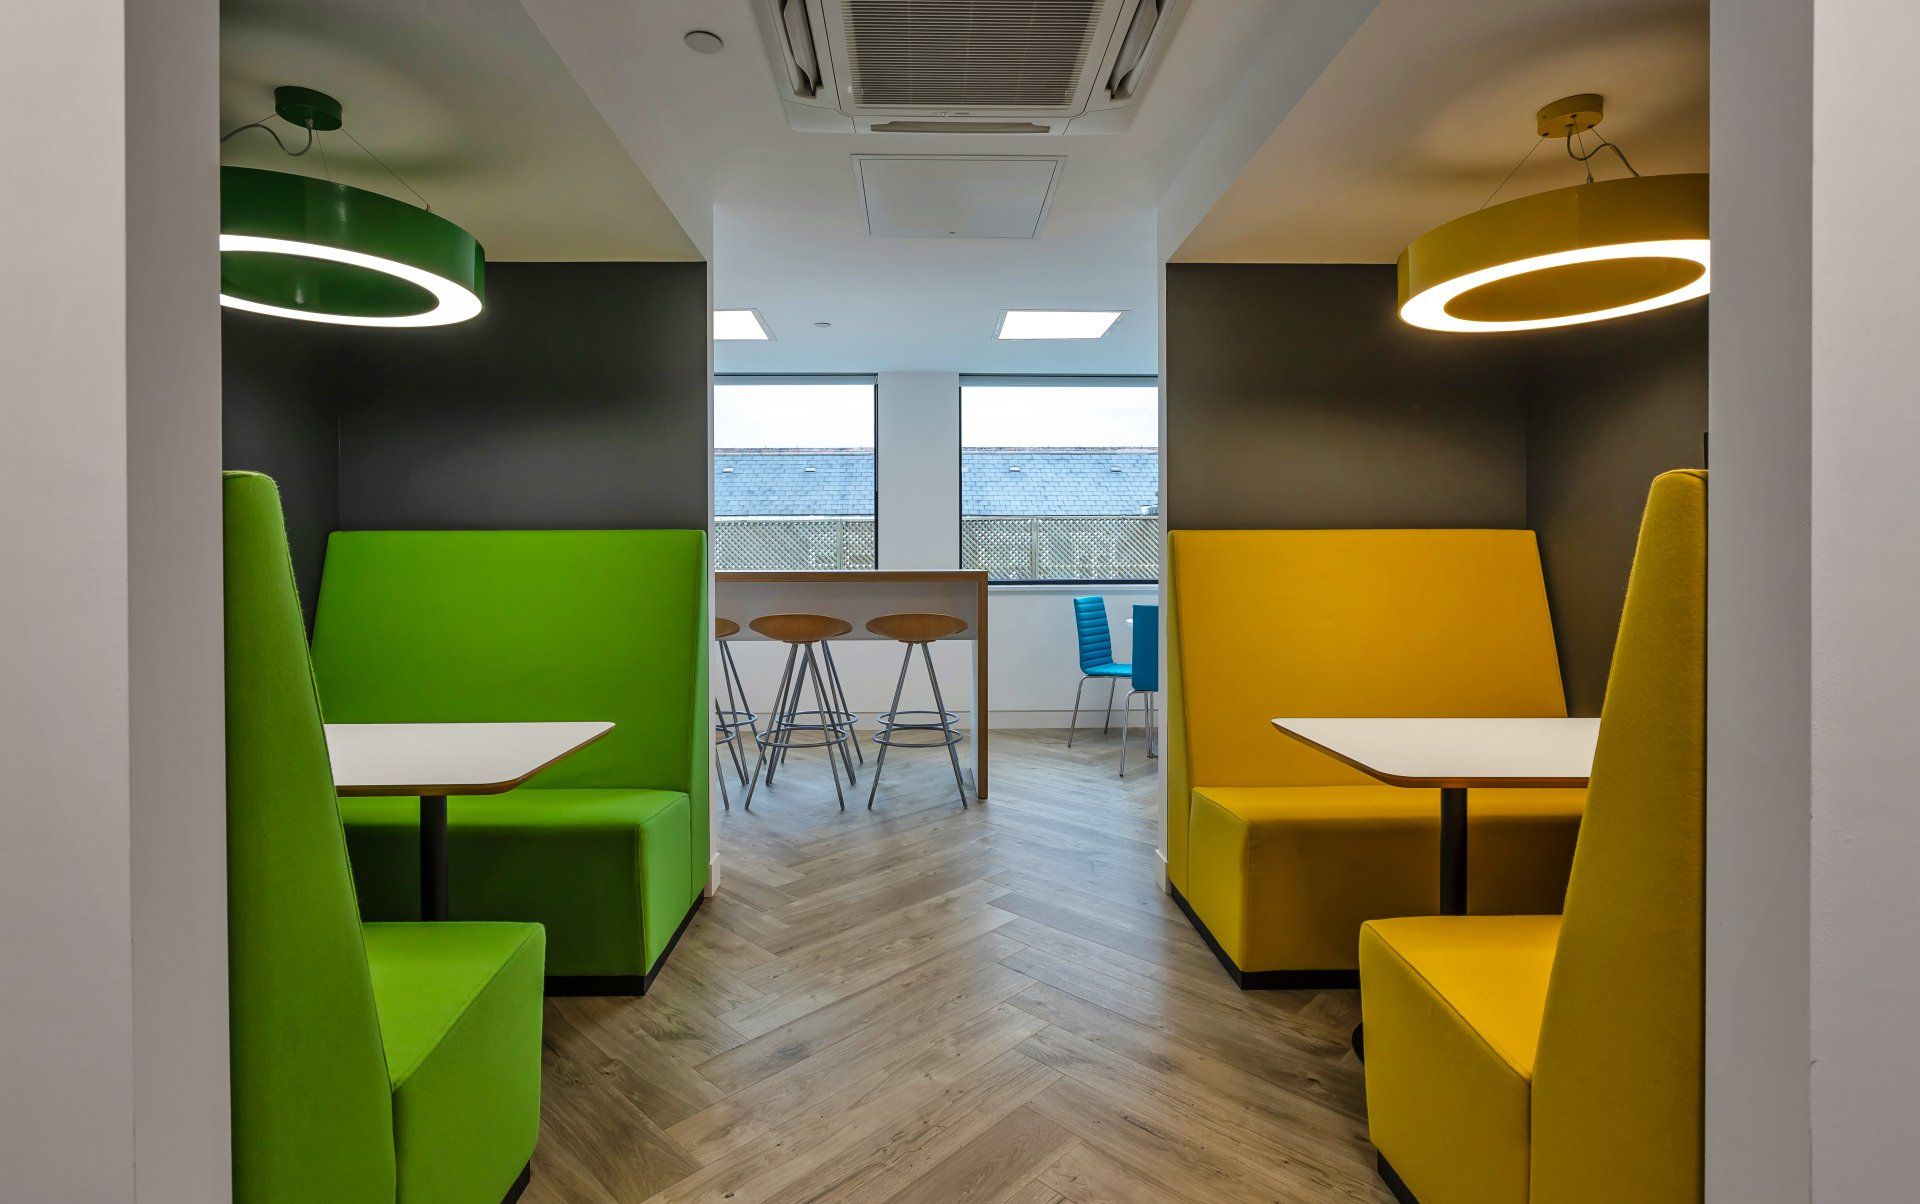 Hybrid working space with green and yellow booth seating by Glenside